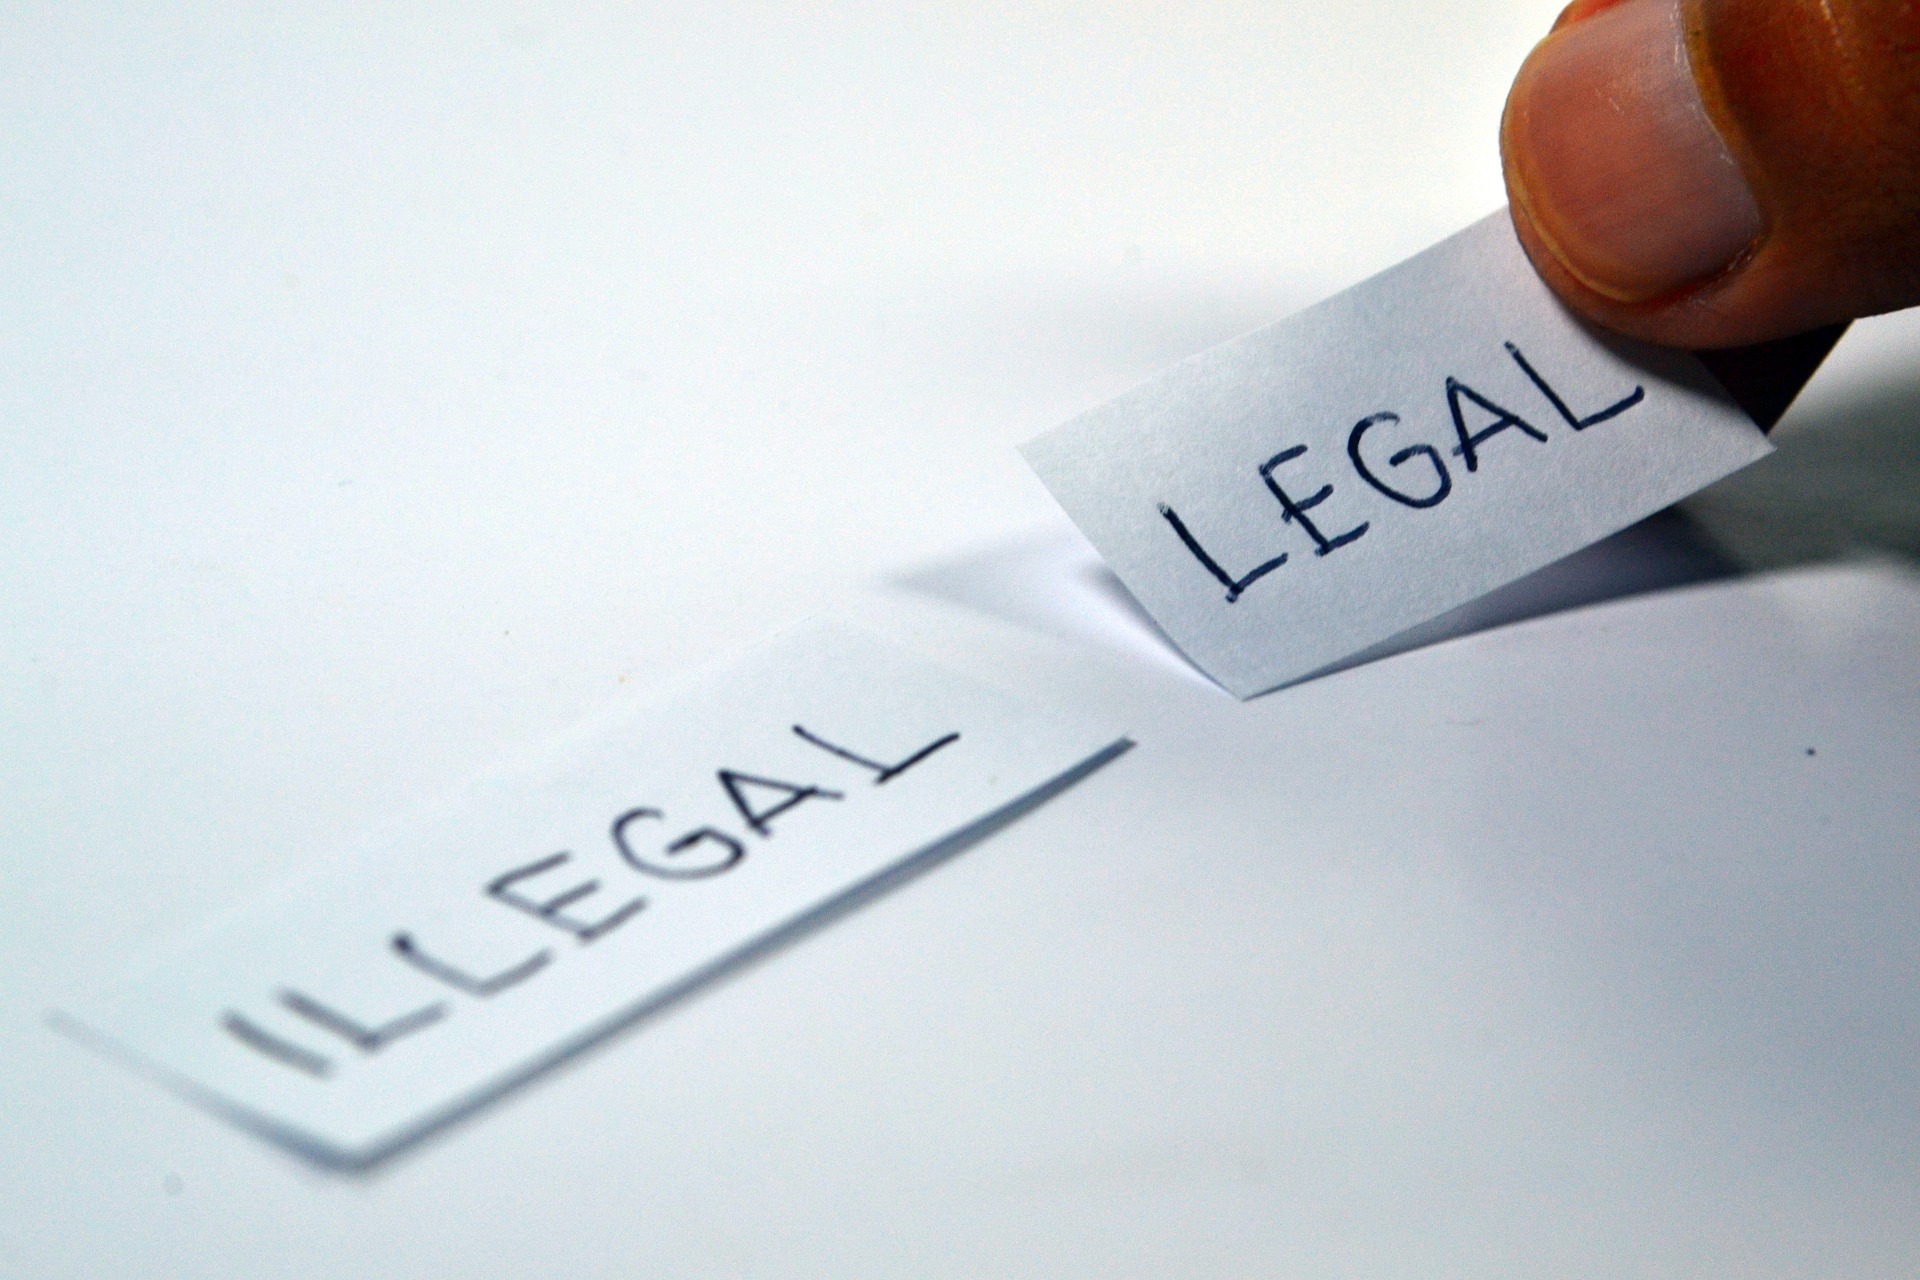 Writing on paper: Legal or illegal